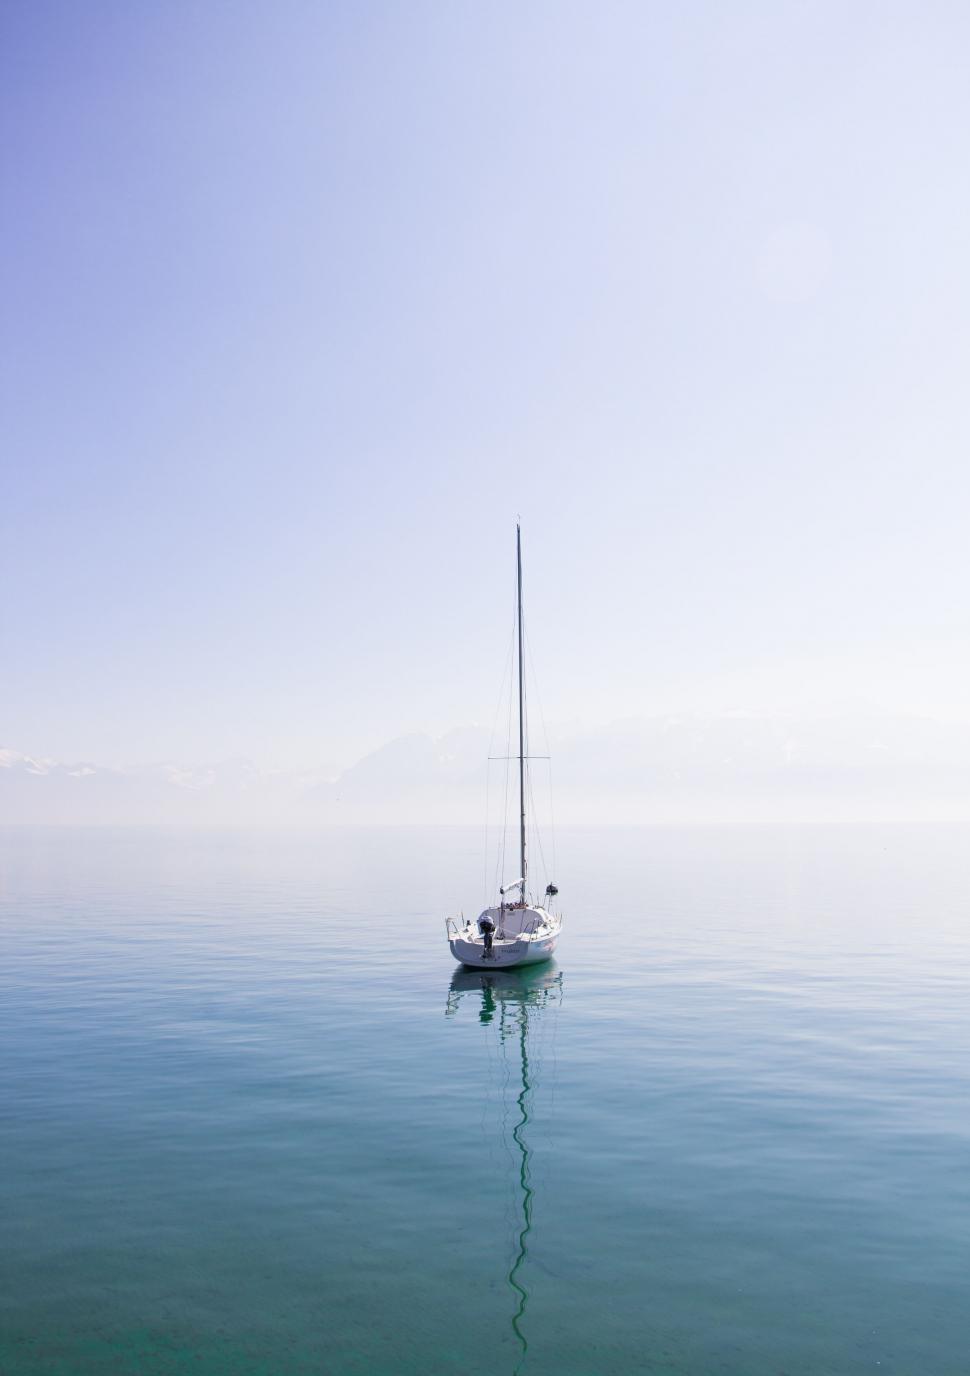 Free Image of Sailboat in serene water with mountains 